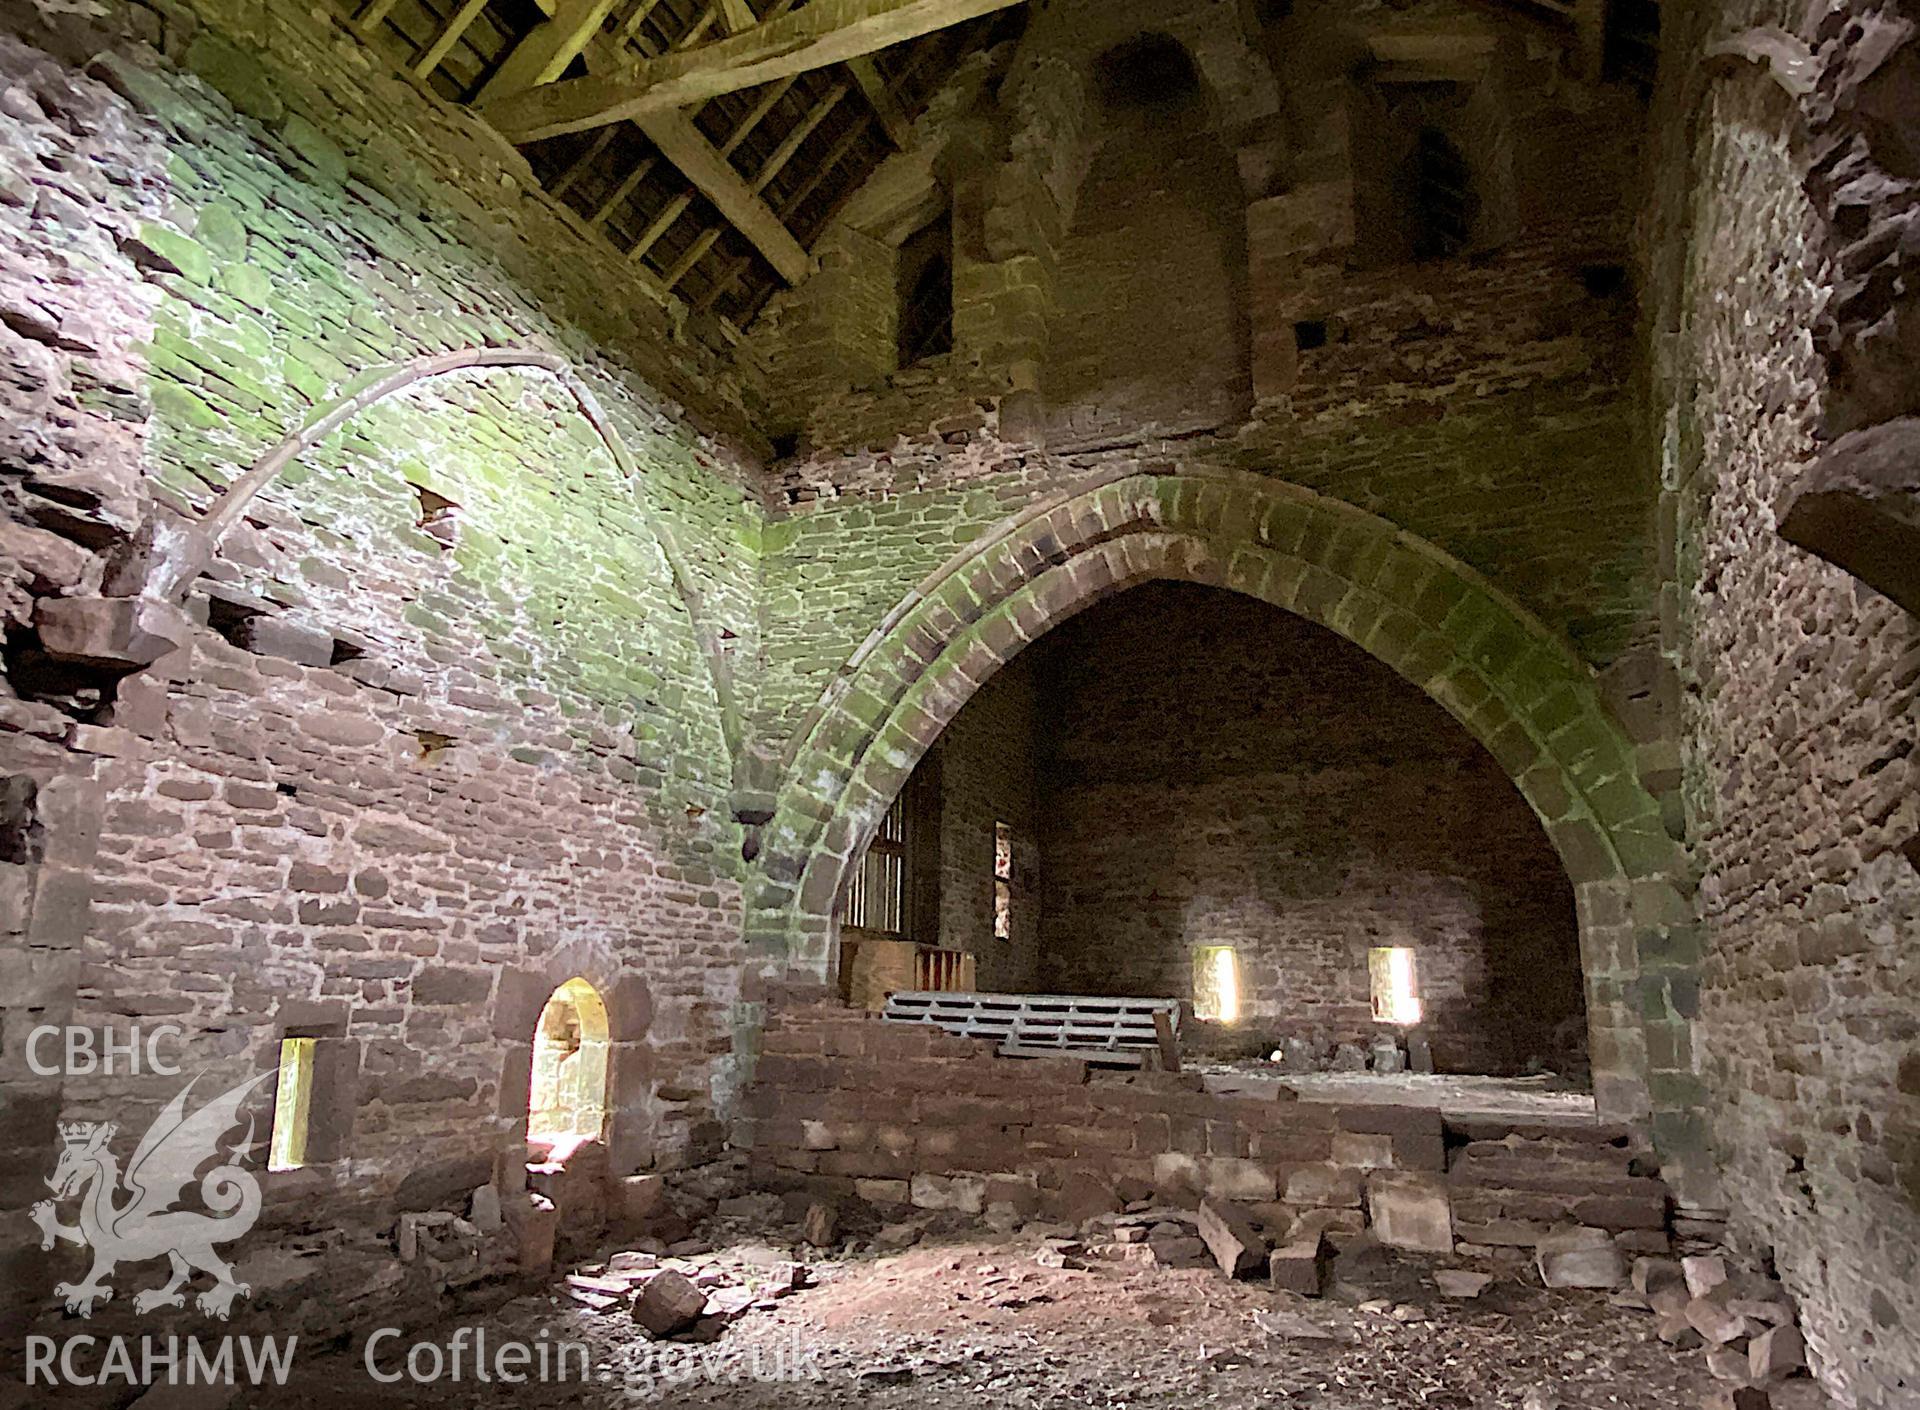 Digital photograph showing interior of Llanthony Priory Gatehouse, produced by Paul Davis in 2023